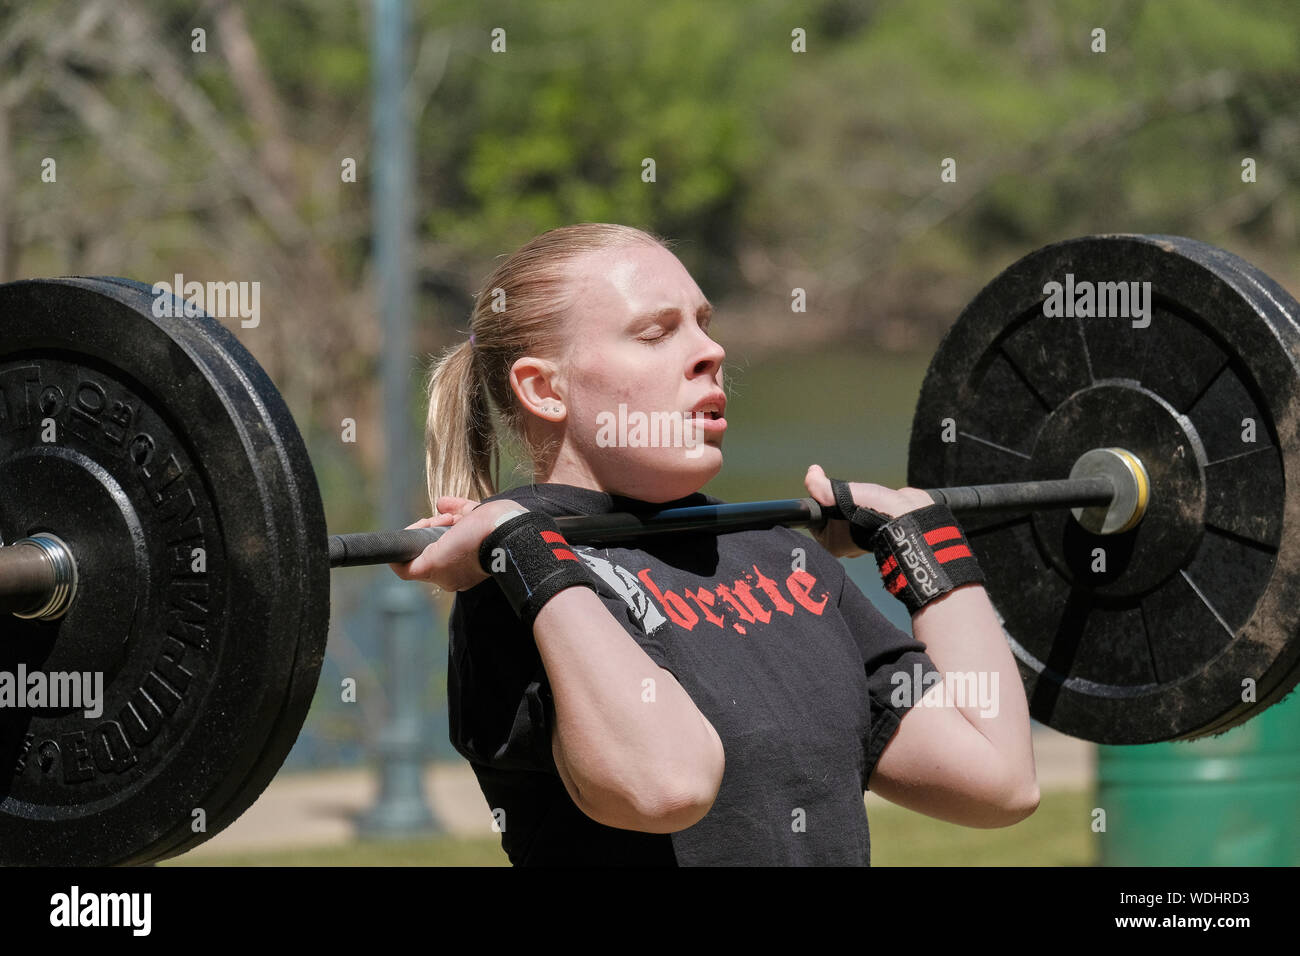 Female or woman competing in a CrossFit fitness challenge competition by dead lifting weights or weightlifting. Stock Photo